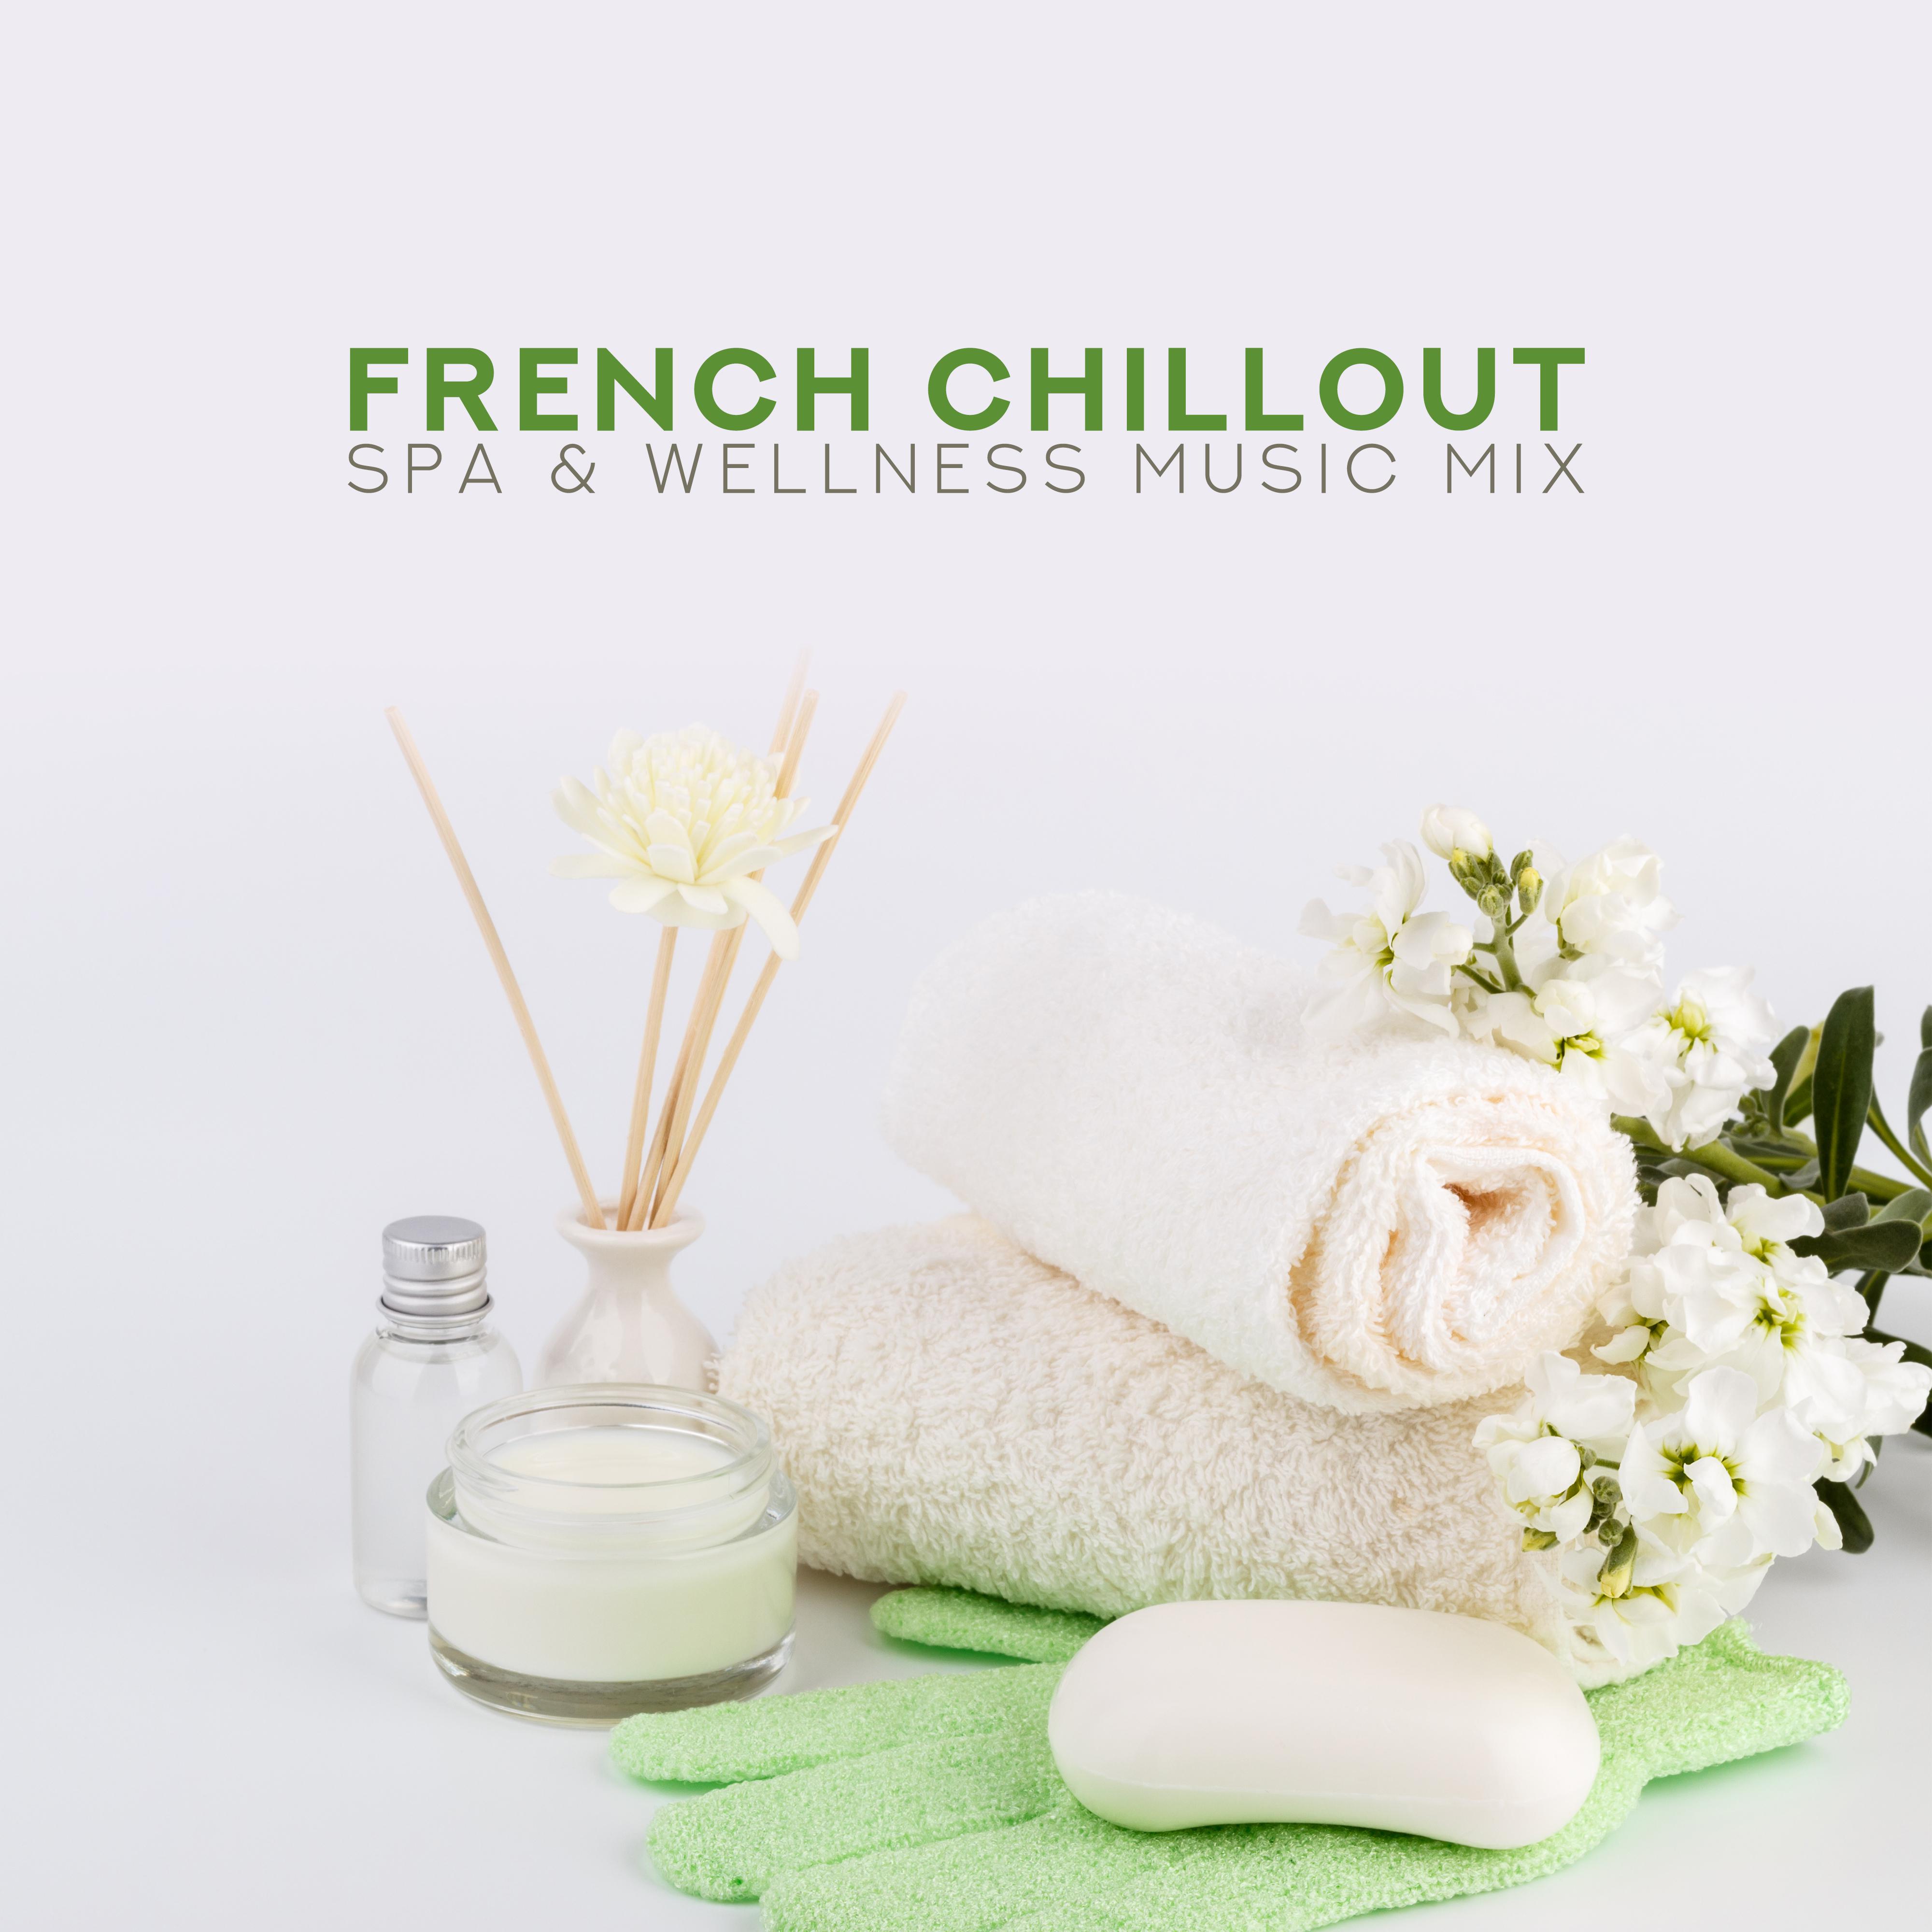 French Chillout Spa & Wellness Music Mix